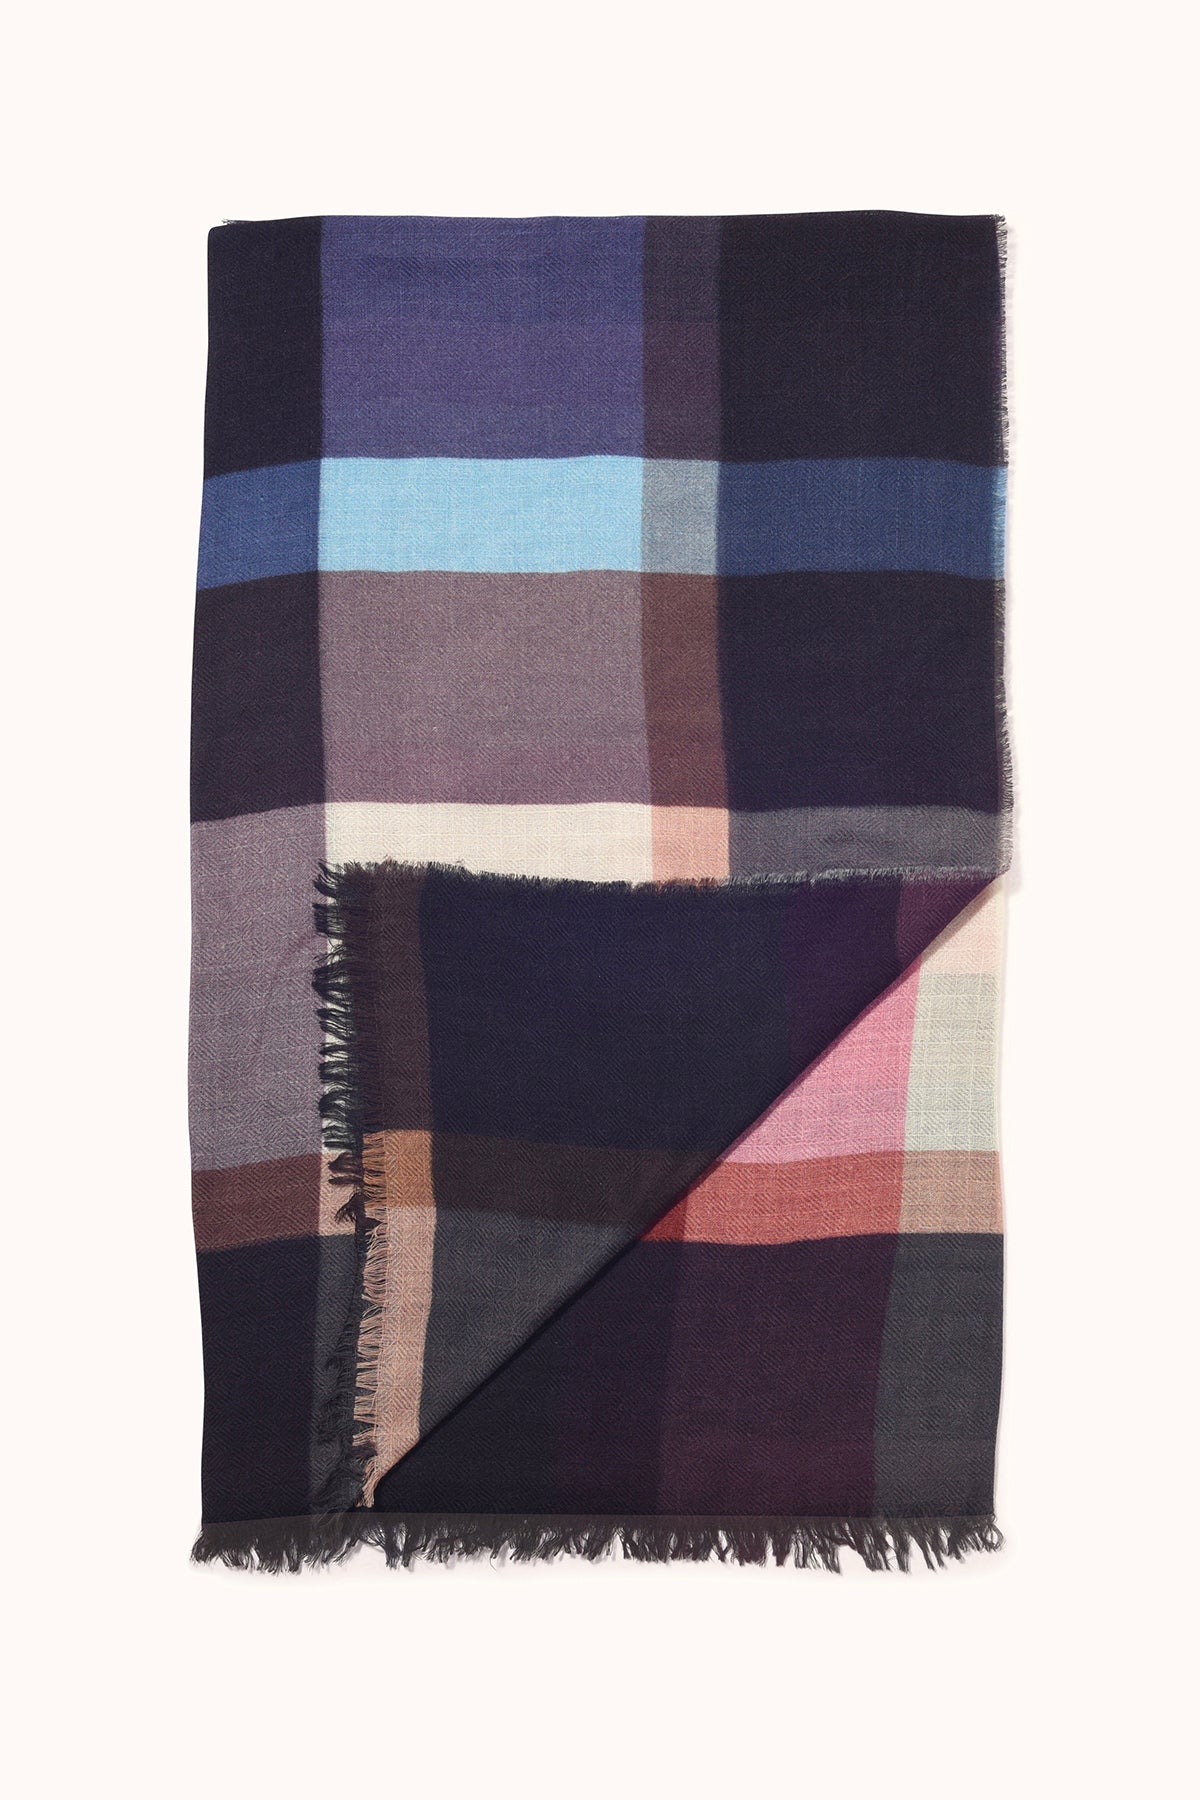   PLAID WOOL BLEND SCARF BY EPICE 